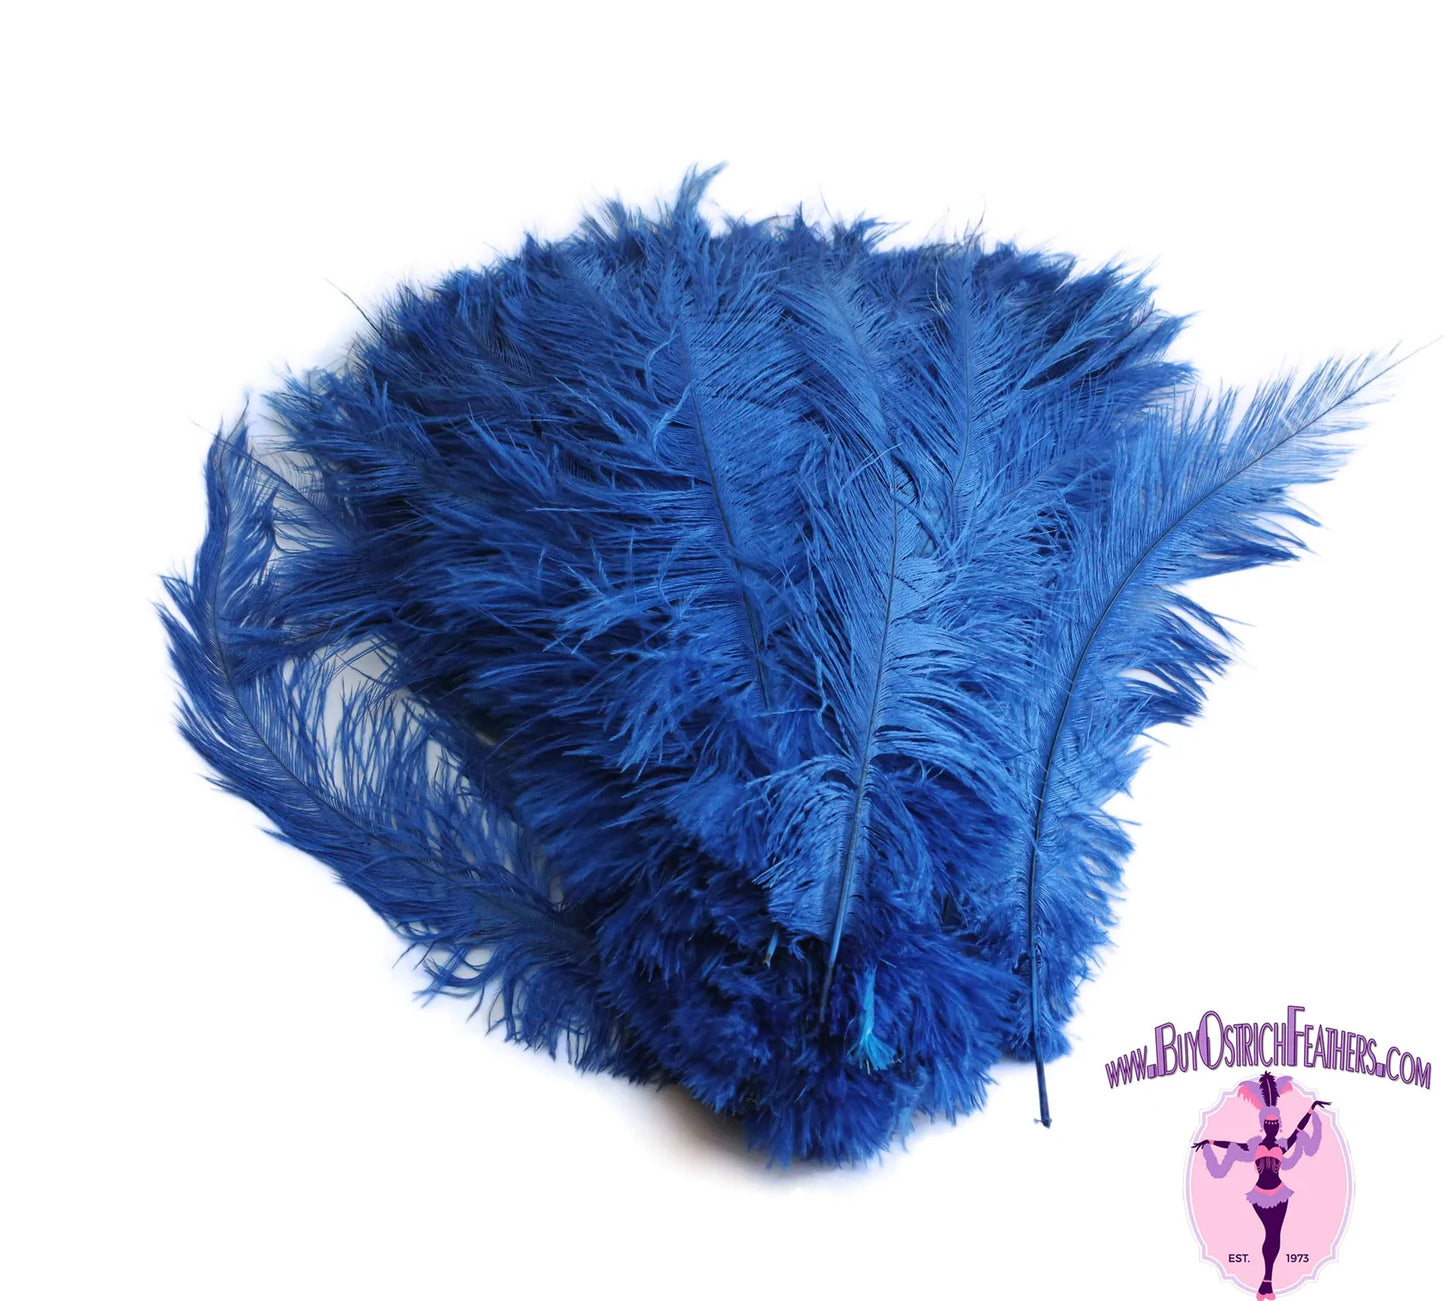 Ostrich Feather Rental 16-20" (Royal Blue) - 250pcs - Buy Ostrich Feathers